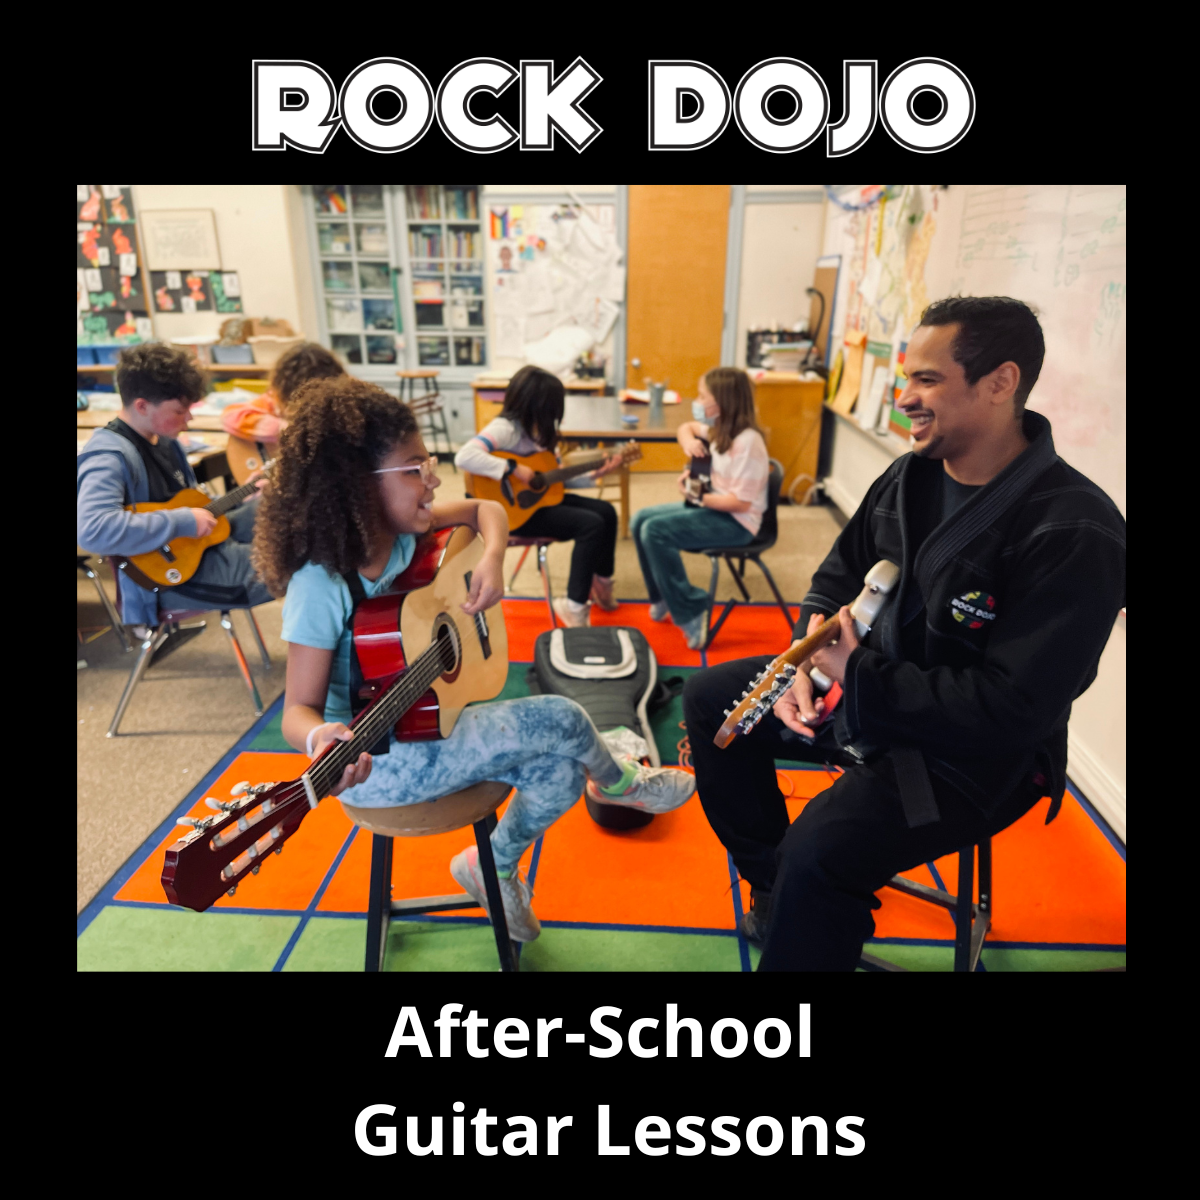 ock Dojo instructor teaching after-school guitar lessons to a group of attentive students.